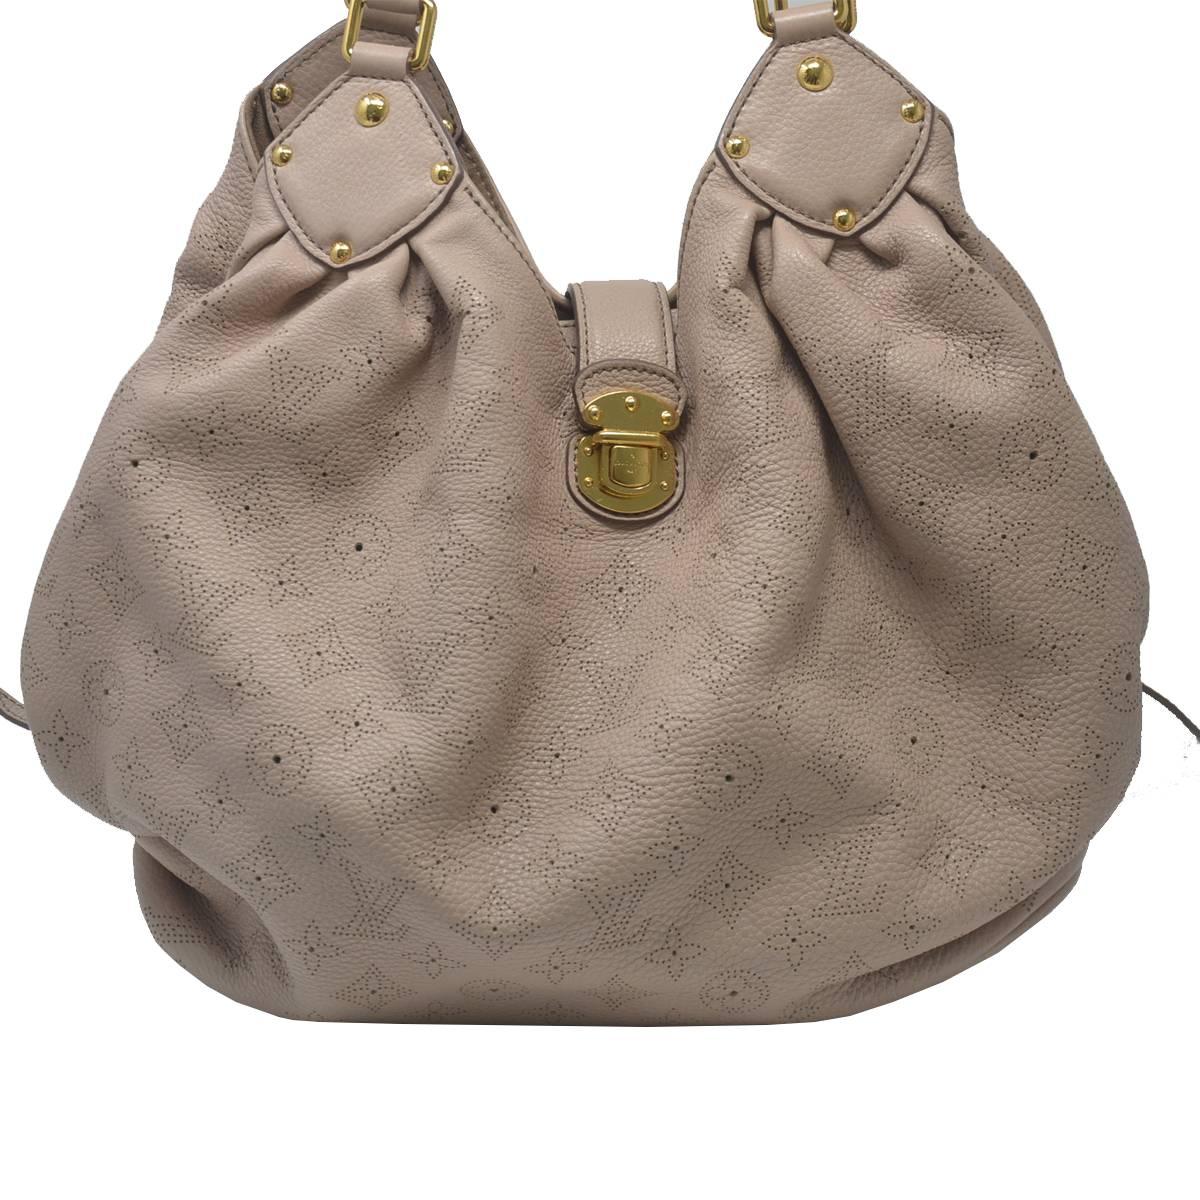 Company - Louis Vuitton
Model - Taupe
Color - Grey
Date Code - AS0192
Material - Leather
Measurements - 14